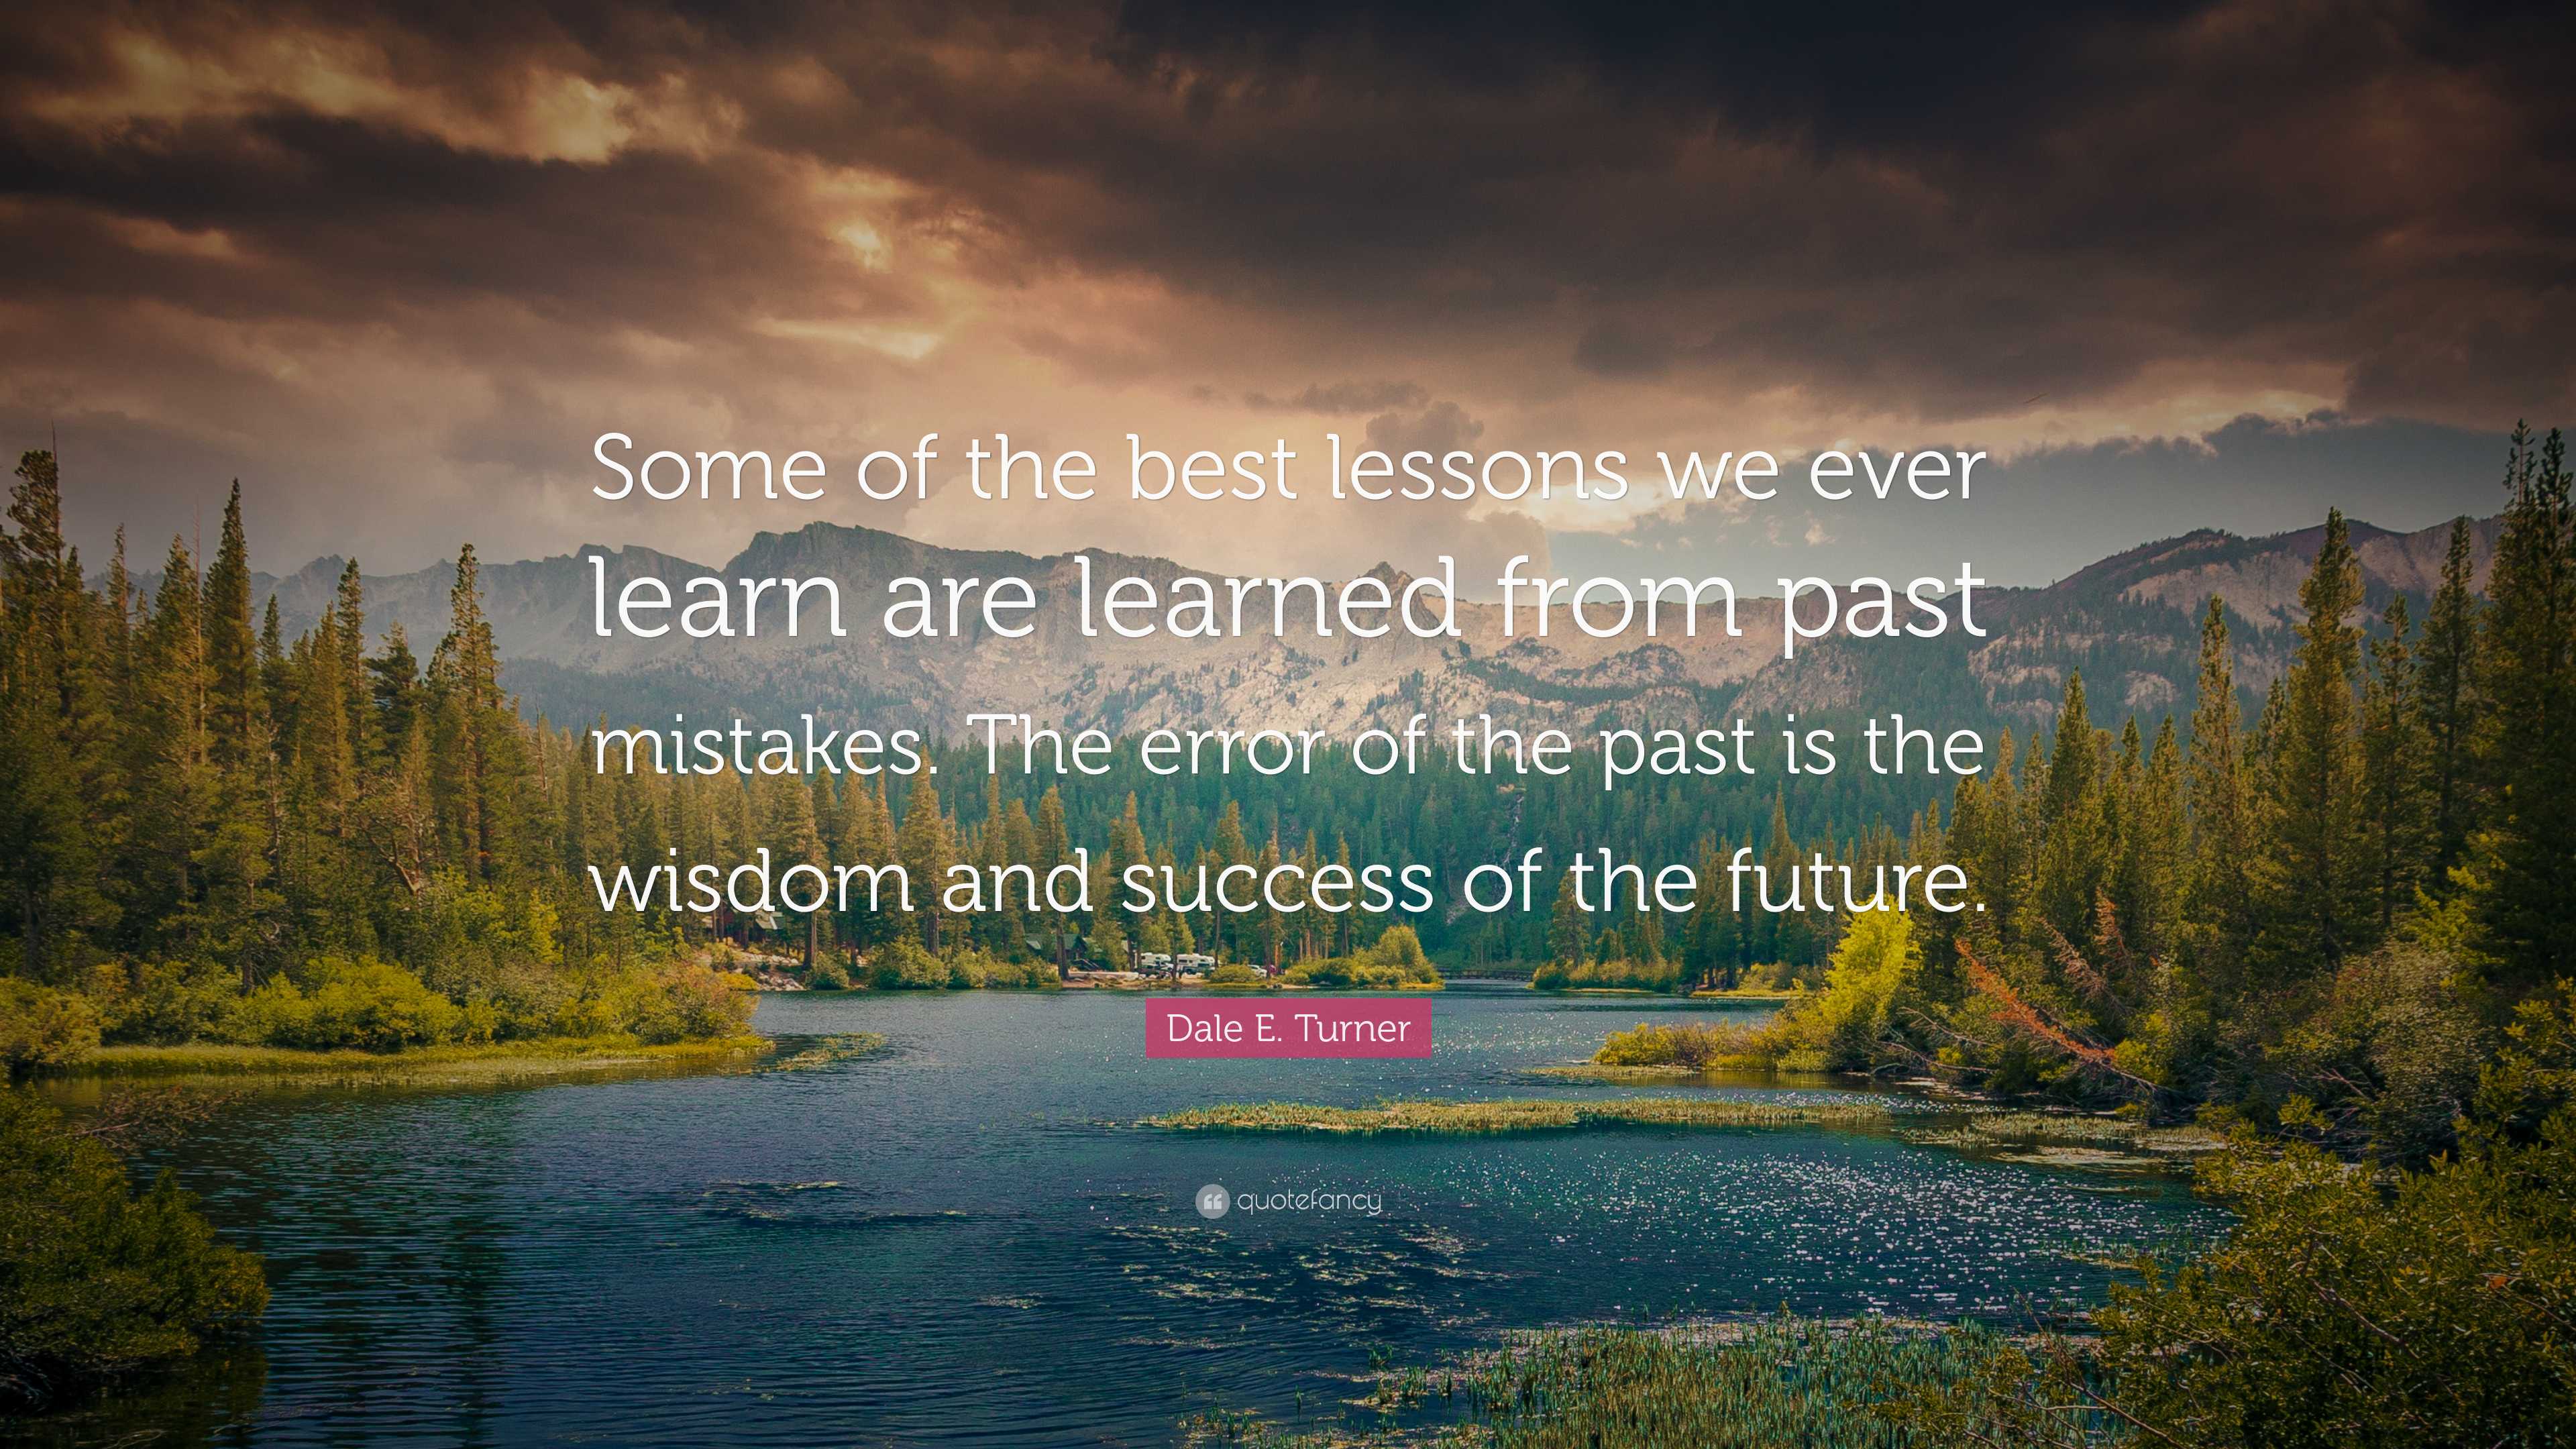 Top 36 Quotes About Learning Lessons From The Past: Famous Quotes & Sayings  About Learning Lessons From The Past